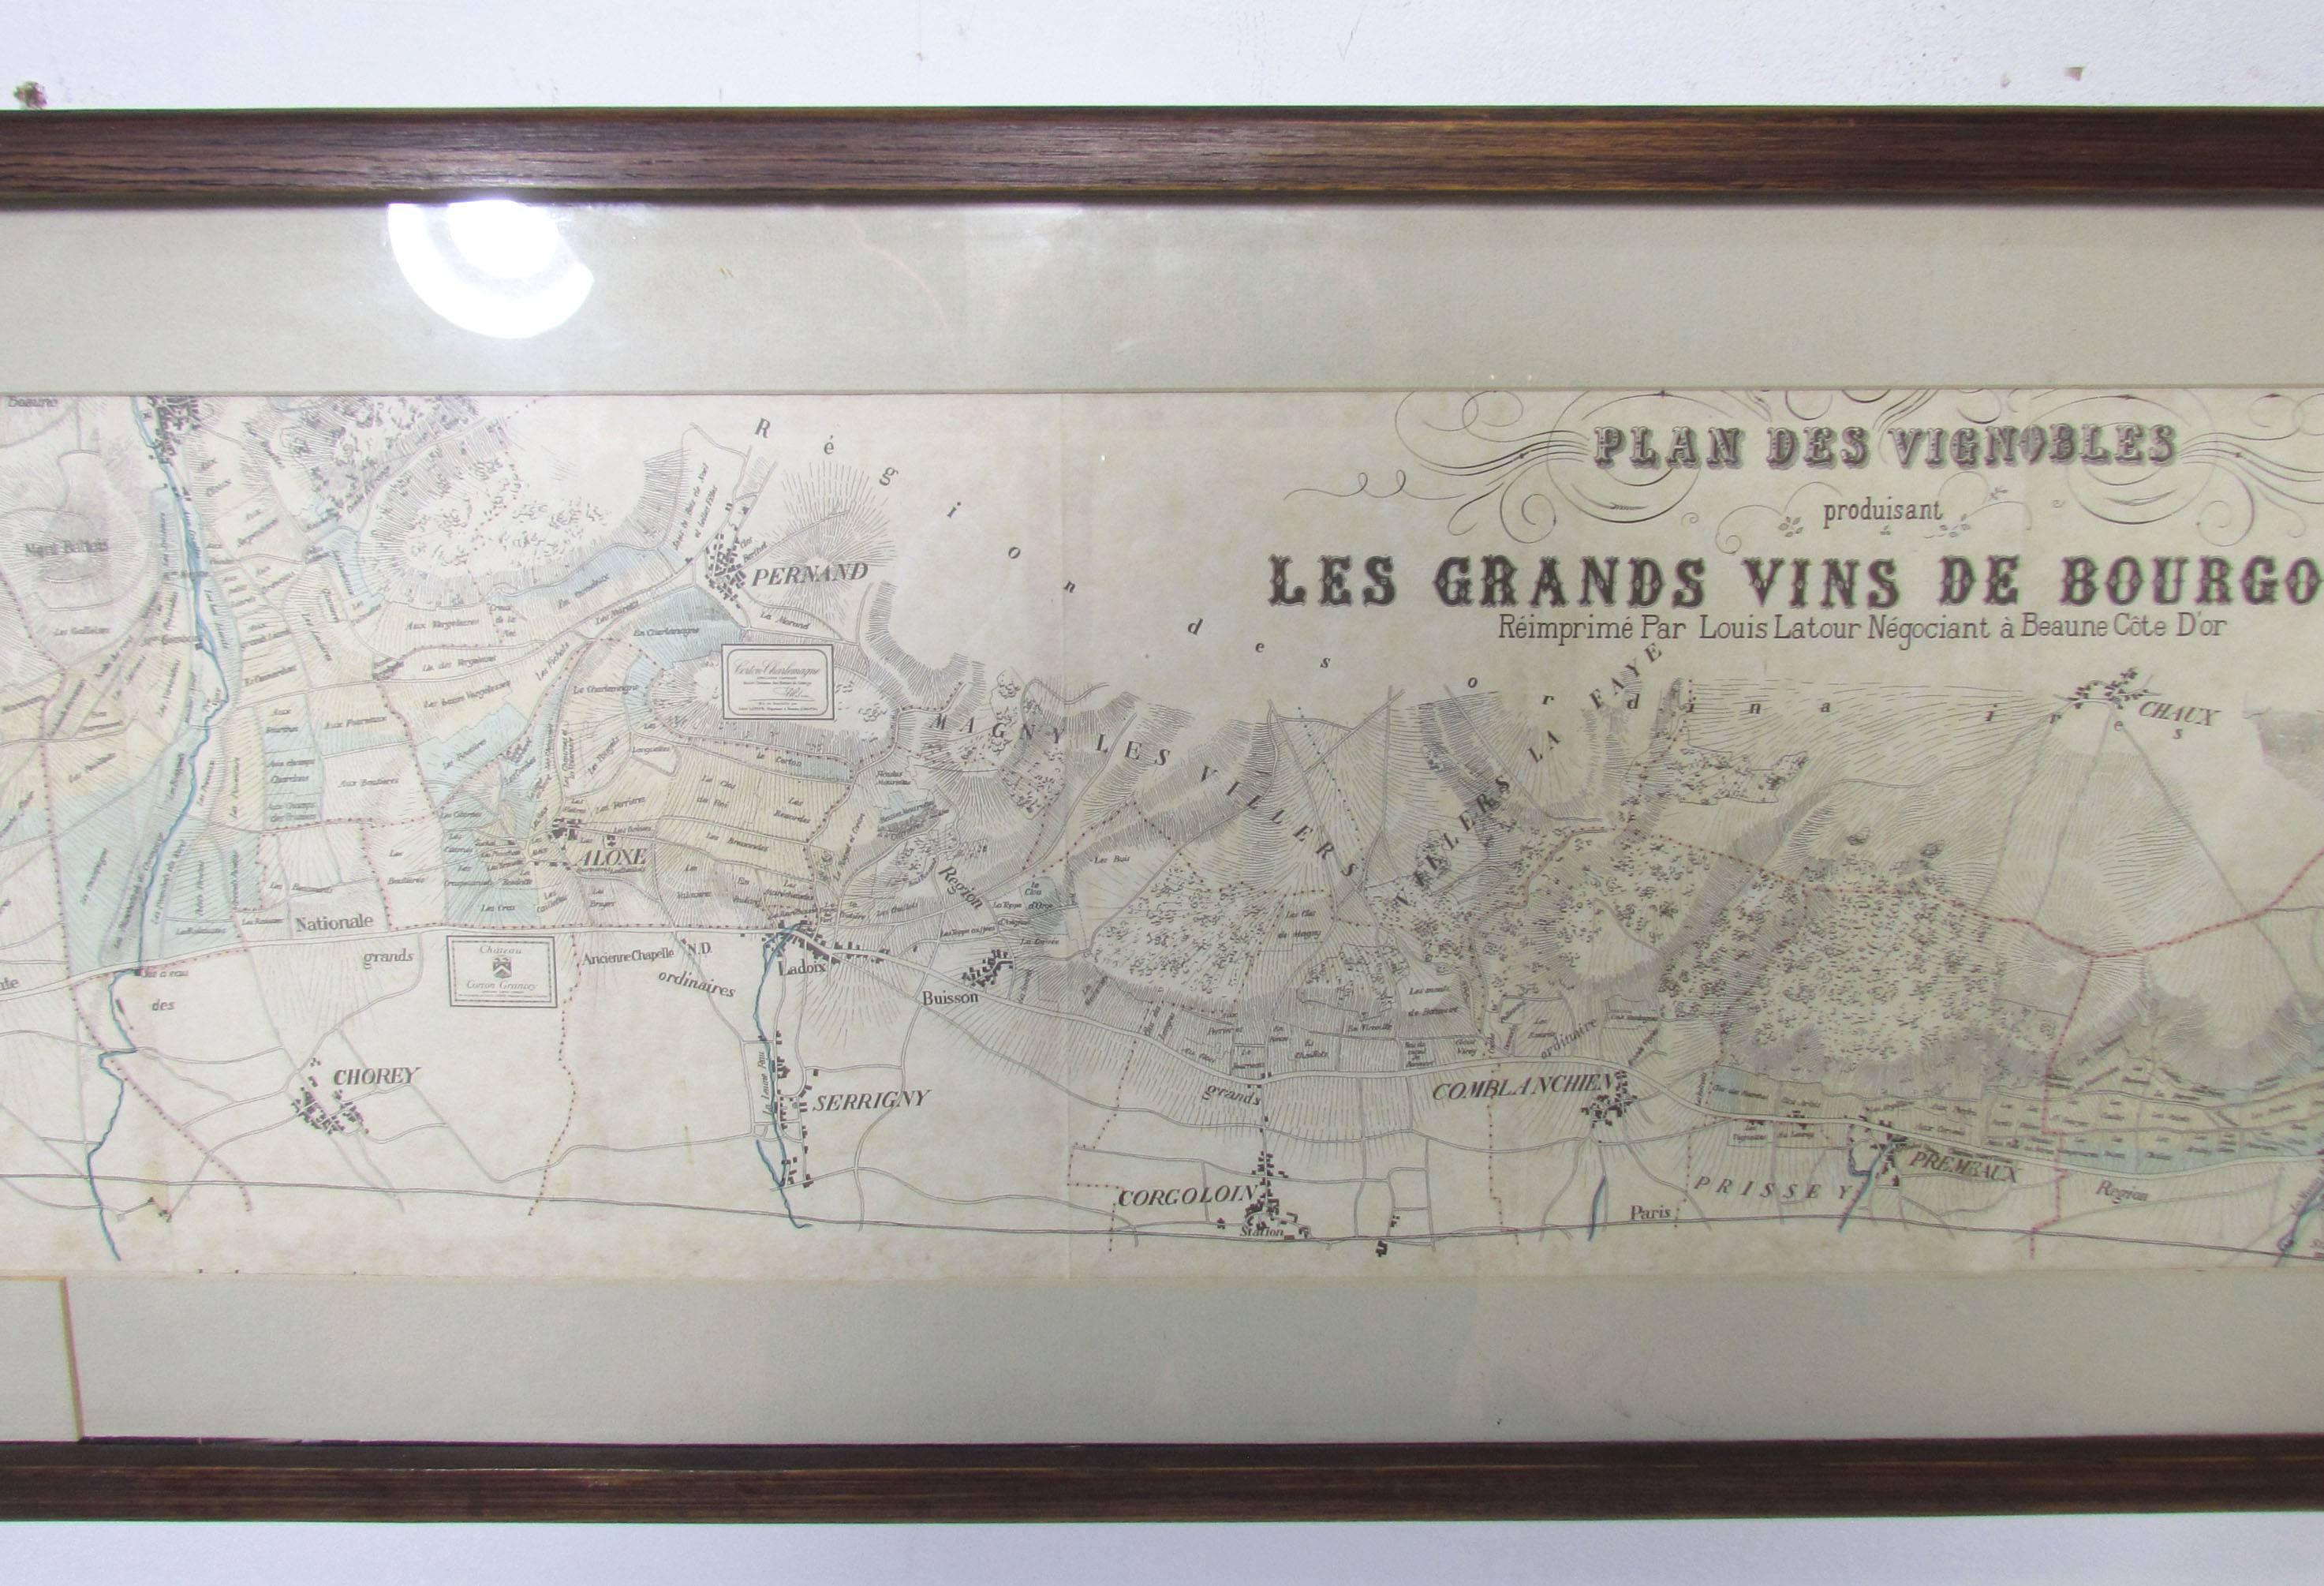 Other Panoramic Antique Lithographic Map for Louis Latour, Burgundy France Region